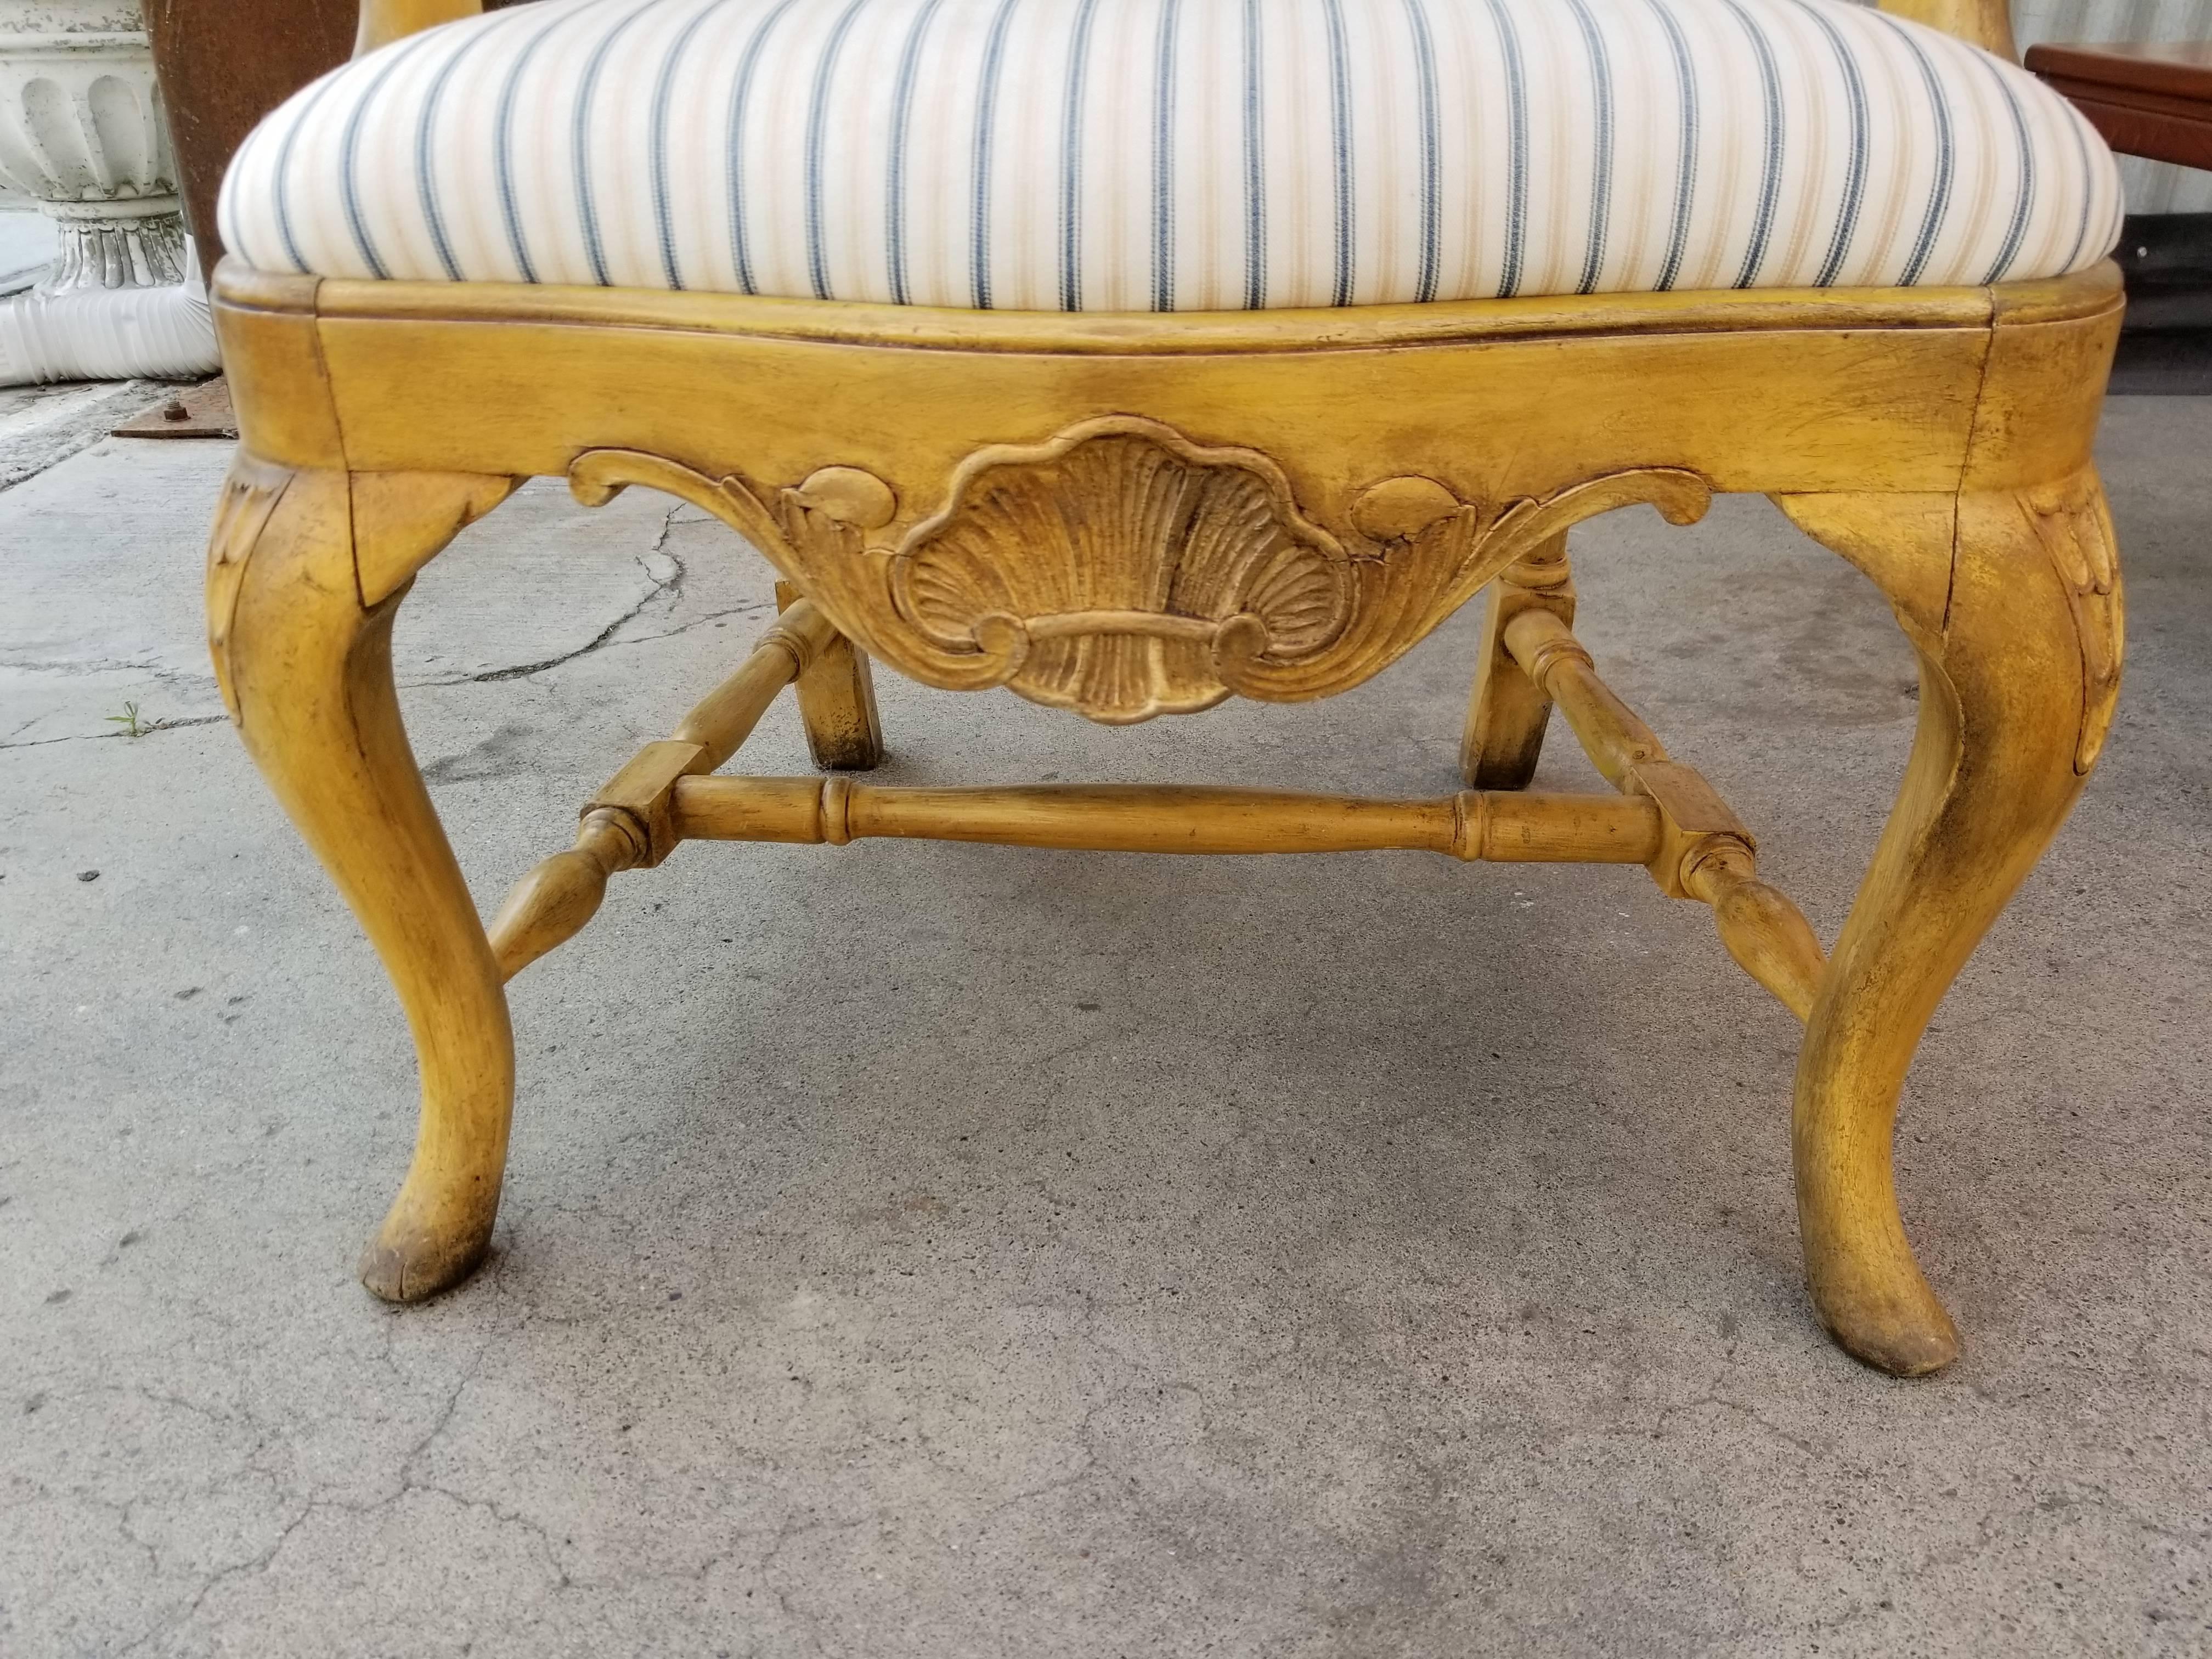 Rococo Style Hand-Carved Armchair In Excellent Condition For Sale In Fulton, CA